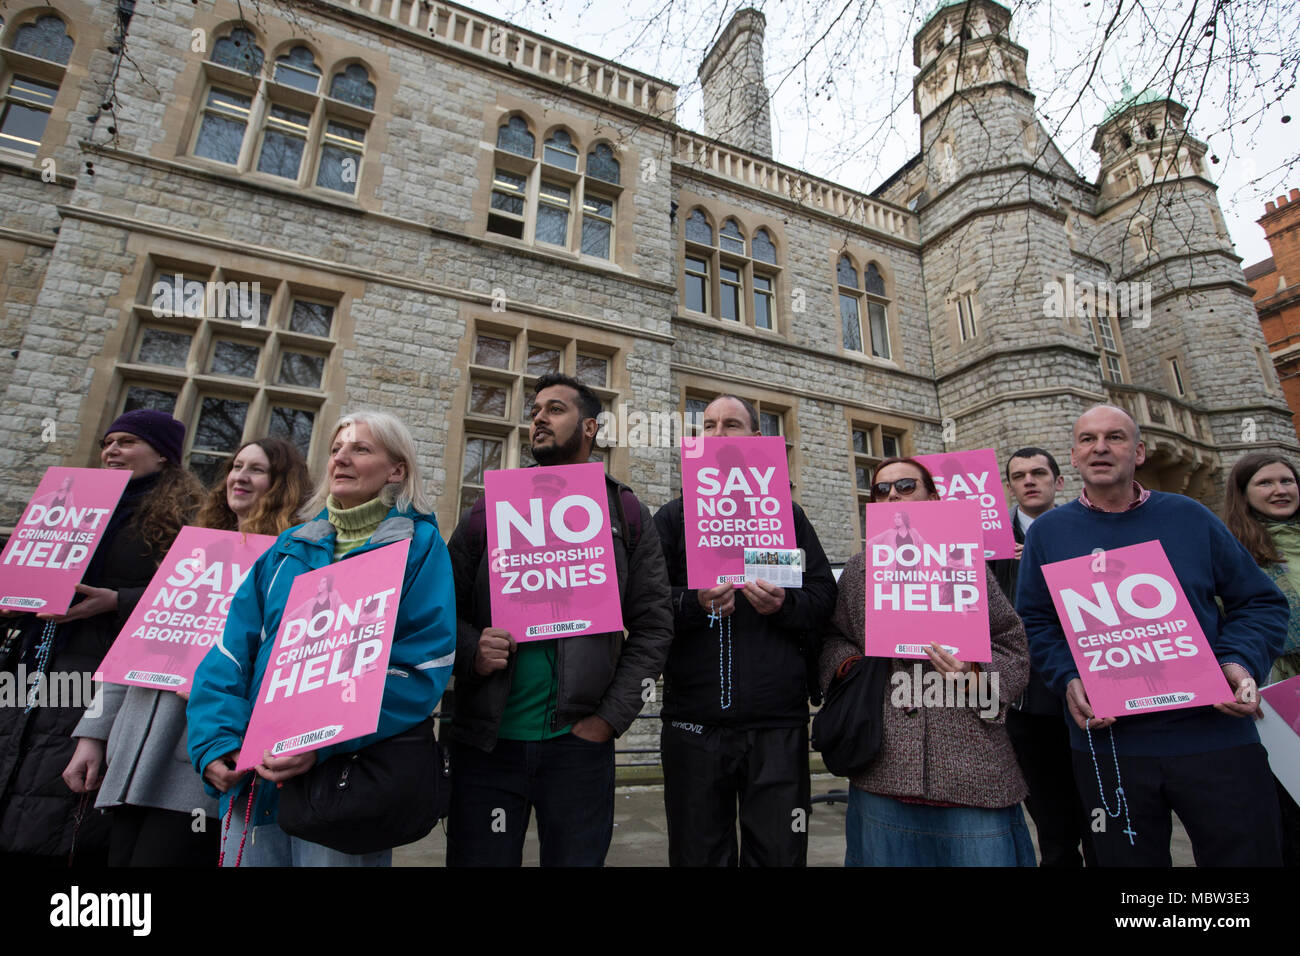 Pro-life campaigners demonstrate outside Ealing Broadway Town Hall before the abortion buffer zone vote this week, London, UK Stock Photo